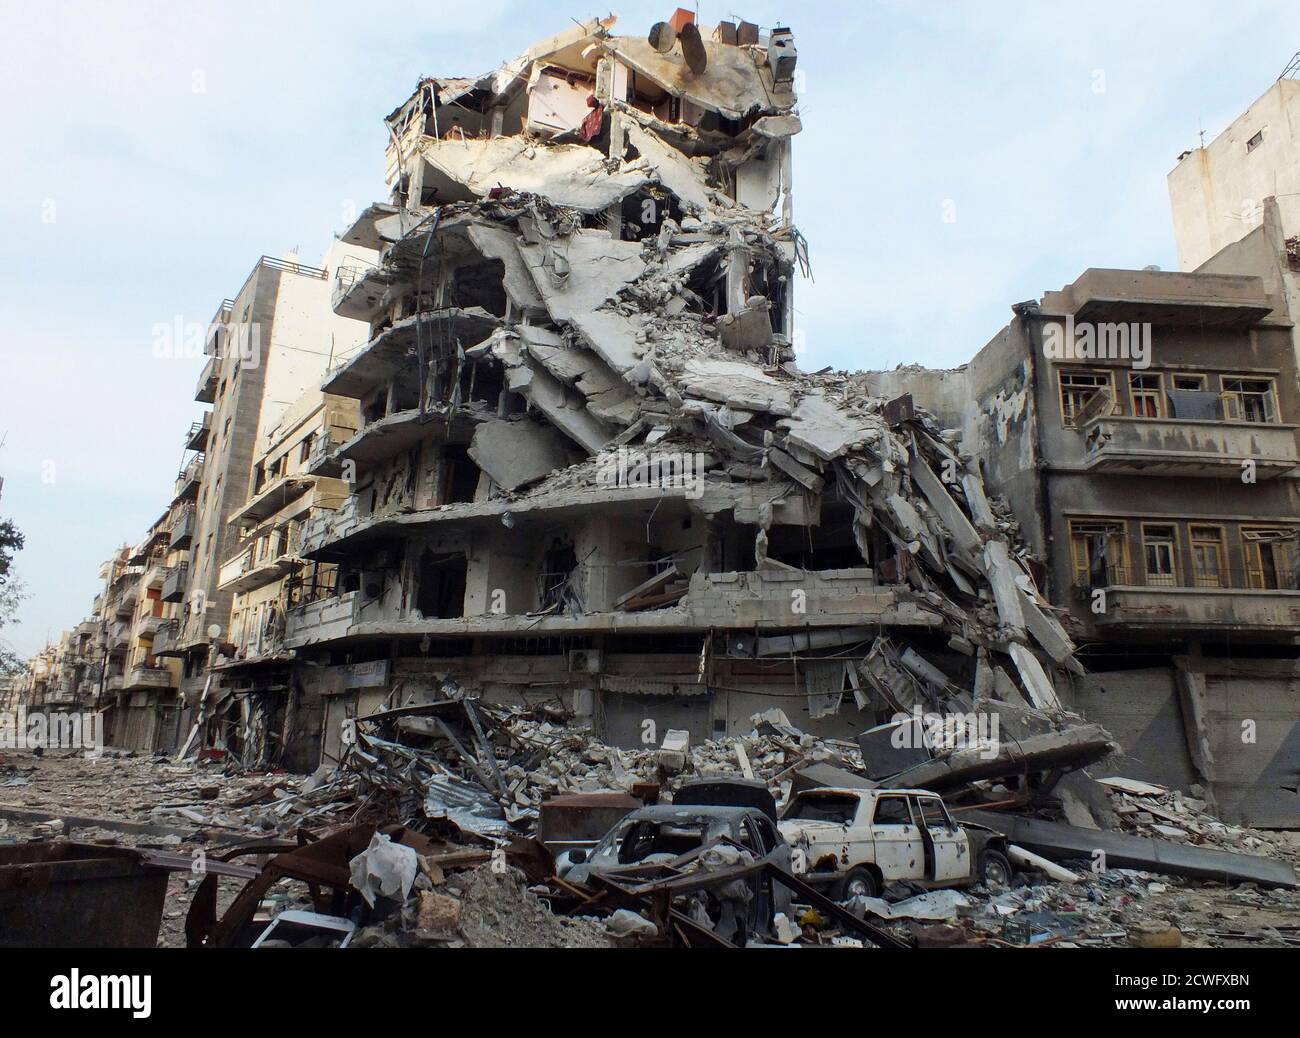 Damaged cars and buildings are seen in Juret al-Shayah in Homs November 1, 2012. Picture taken November 1, 2012.  REUTERS/Yazan Homsy (SYRIA - Tags: CONFLICT POLITICS TPX IMAGES OF THE DAY) Stock Photo